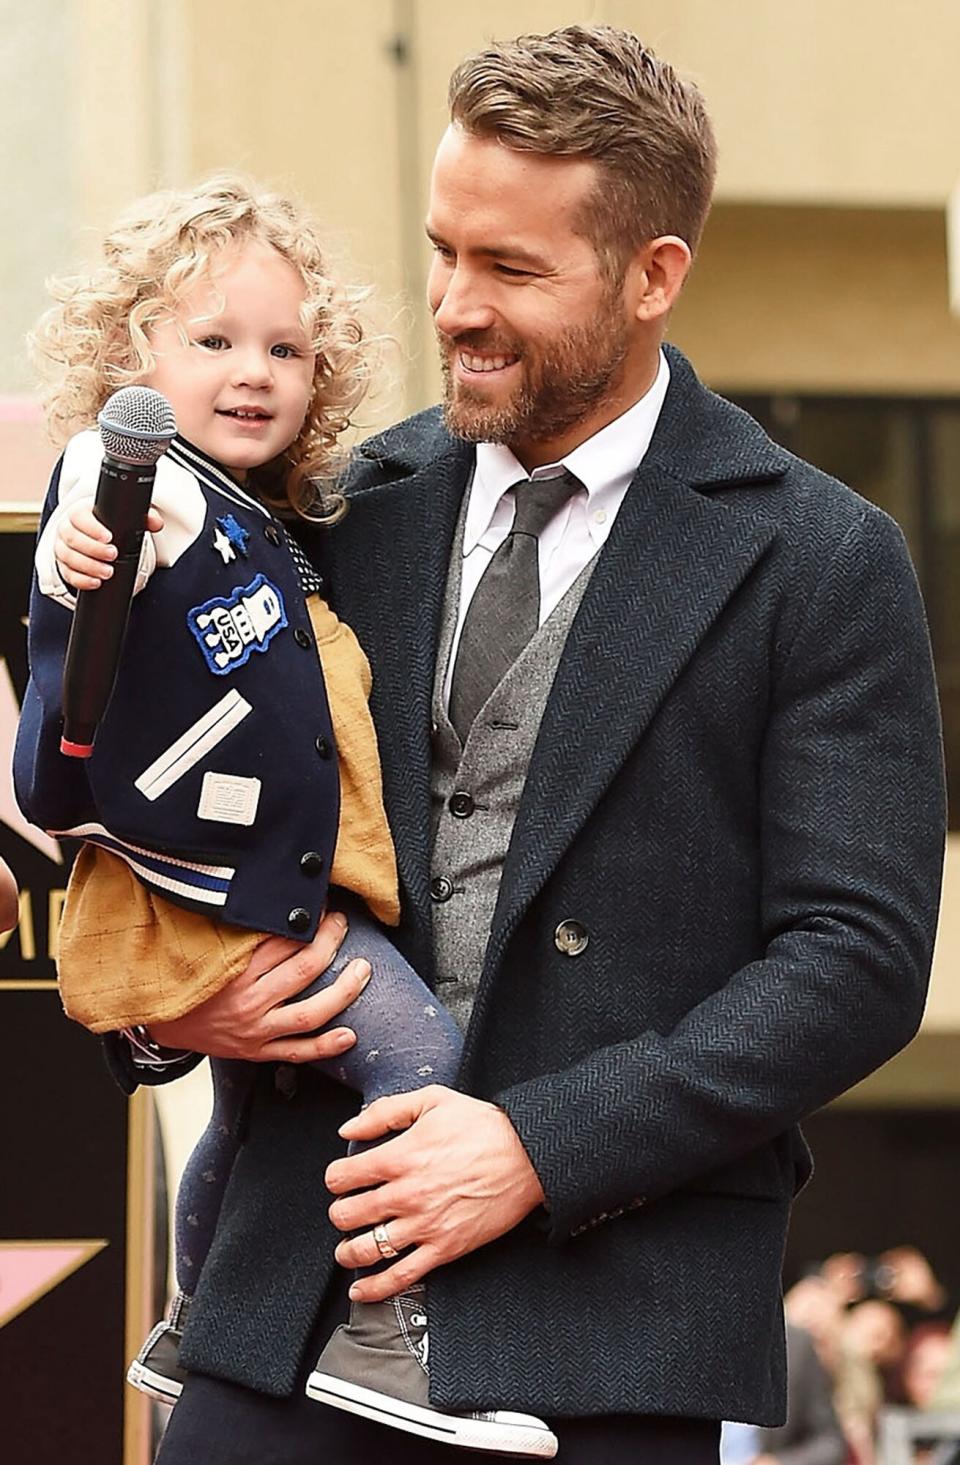 Ryan Reynolds (R) poses for a photo with his daughter, James Reynolds during a ceremony honoring him with a star on the Hollywood Walk of Fame on December 15, 2016 in Hollywood, California